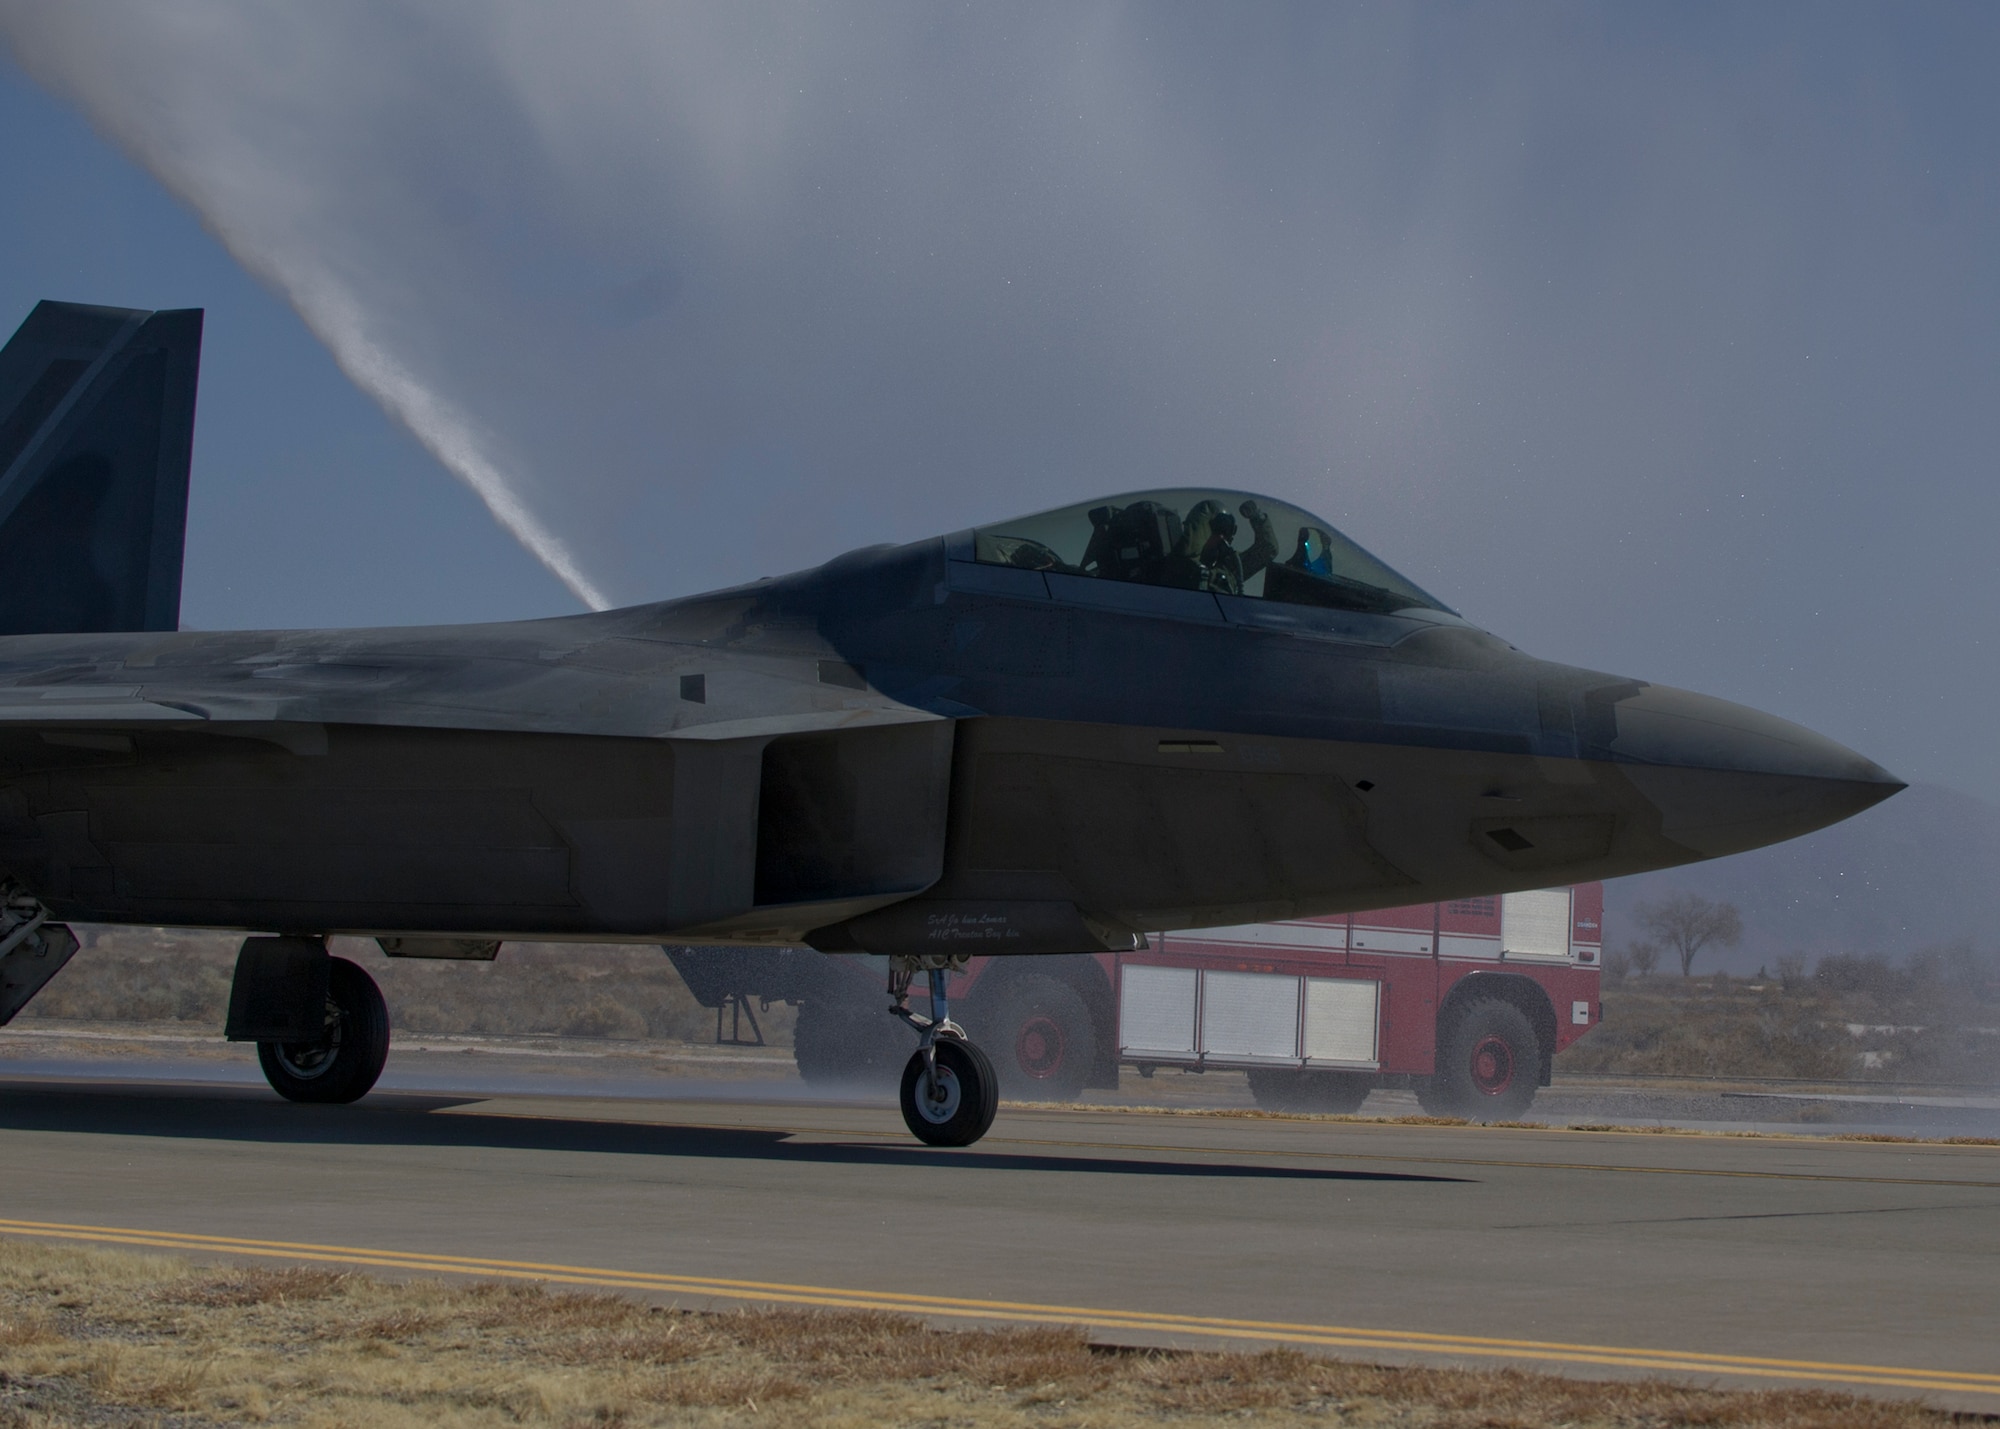 An F-22 Raptor prepares to land at Holloman Air Force Base N.M., after completing the final four-ship tactical sortie over the Tularosa Basin Feb. 20. The 7th Fighter Squadron and members of the Holloman community celebrated this final sortie before the F-22s depart for Tyndall Air Force Base, Fla., in early April. (U.S. Air Force photo by Airman 1st Class Chase Cannon/Released)